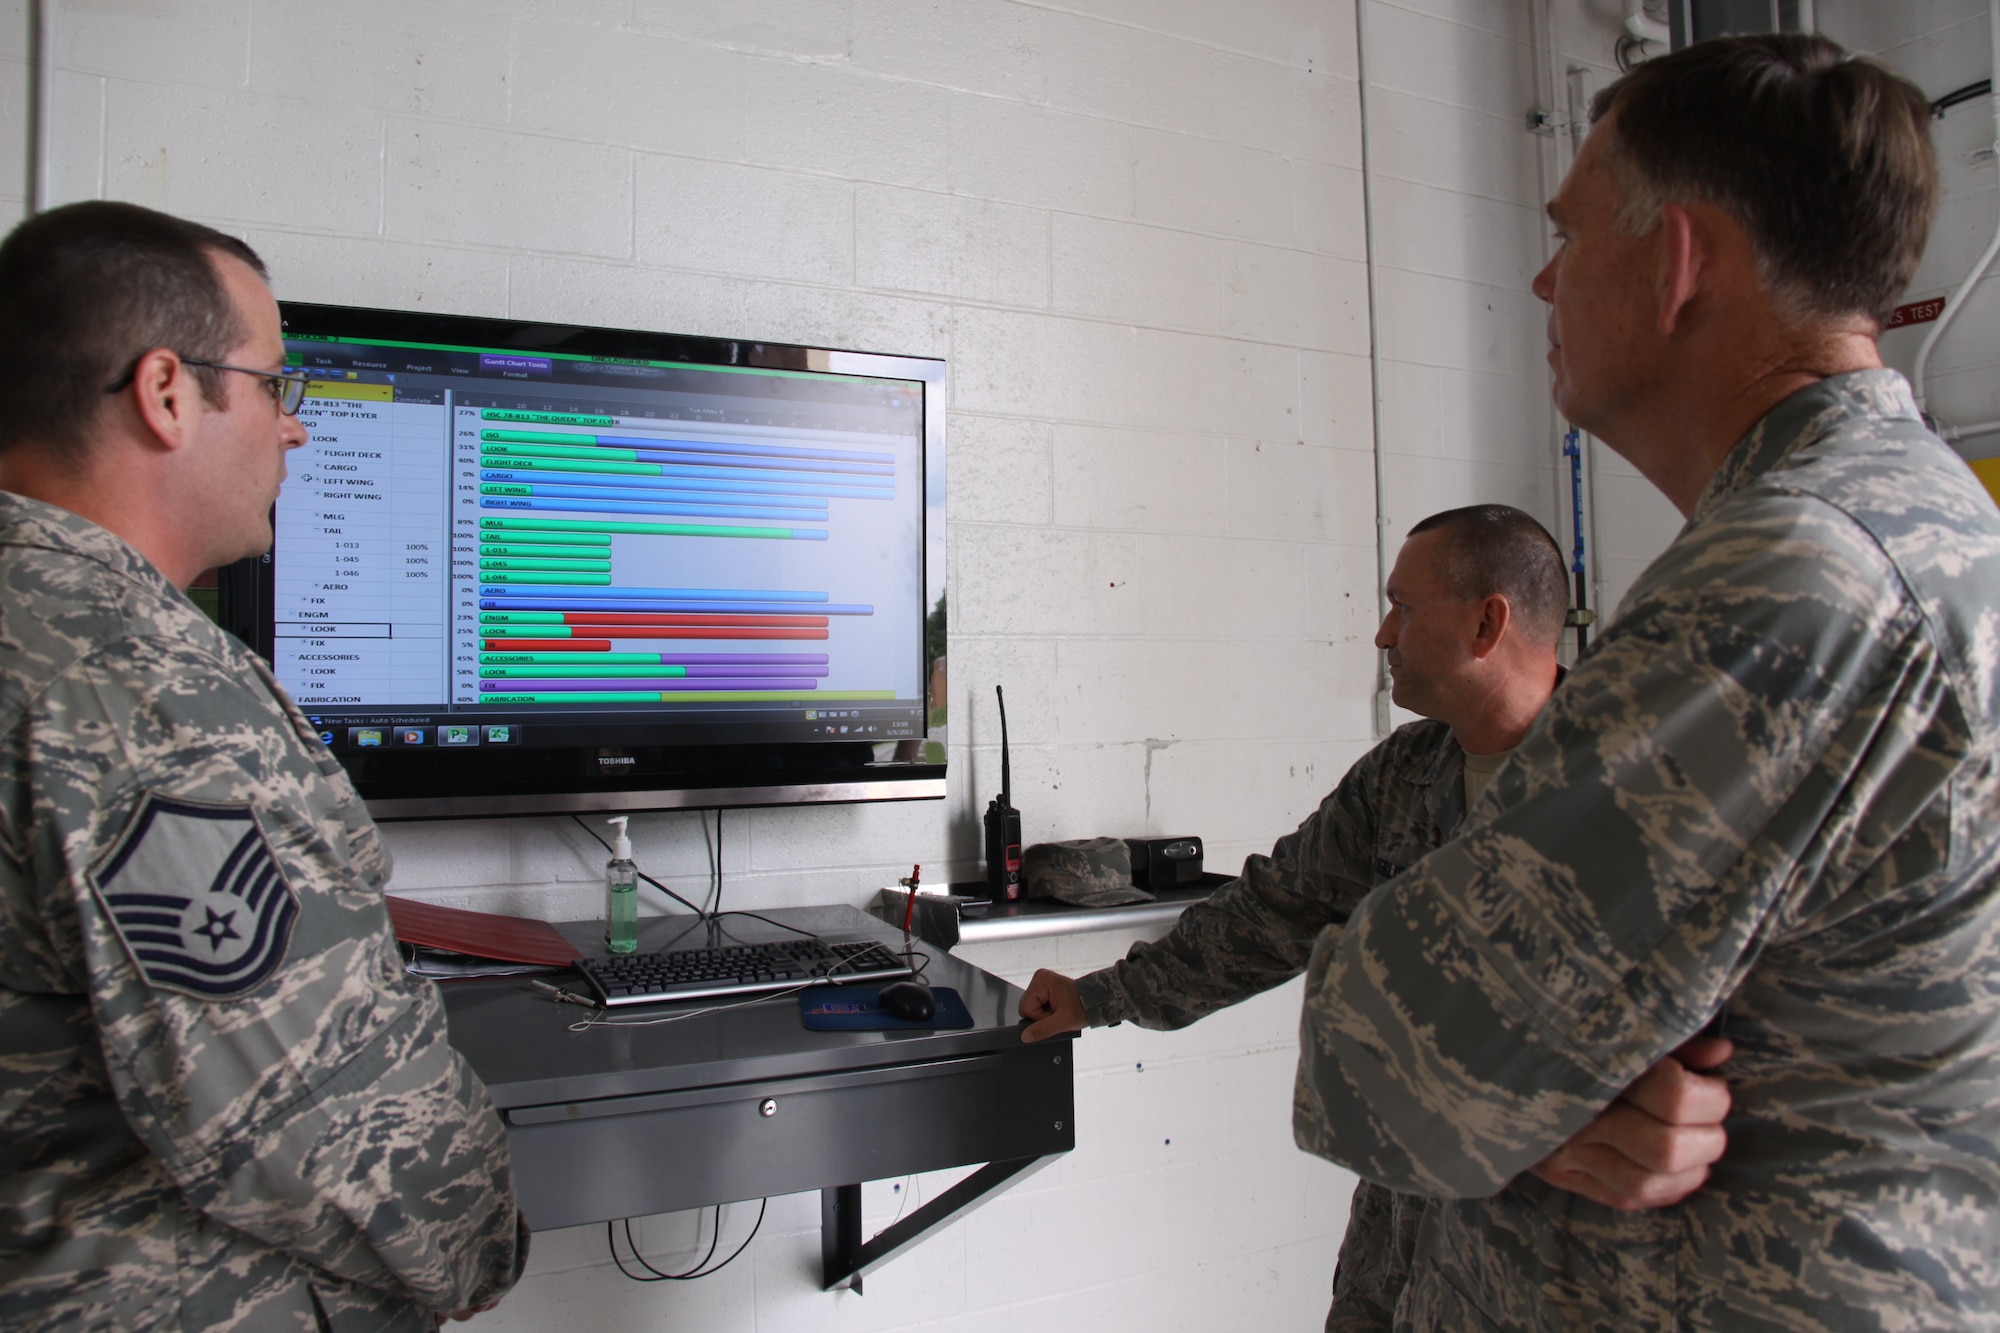 Maj. Gen. Wallace “Wade” Farris, 22nd Air Force commander, reviews the C-130 aircraft isochronal inspection process with Chief Master Sgt. Terrance Keblish, 911th Maintenance Squadron superintendent, and Master Sgt. Sam Ewing, 911th MXS flight chief, during a visit here May 5, 2012.  Since 2007, the 911th MXS ISO inspection process has saved more than 940 days of flying hour capability and $42 million in costs through their ability to decrease fly-to-fly times and provide quicker turnaround of aircraft.  (U.S. Air Force photo by Master Sgt. Mark A. Winklosky/Released)